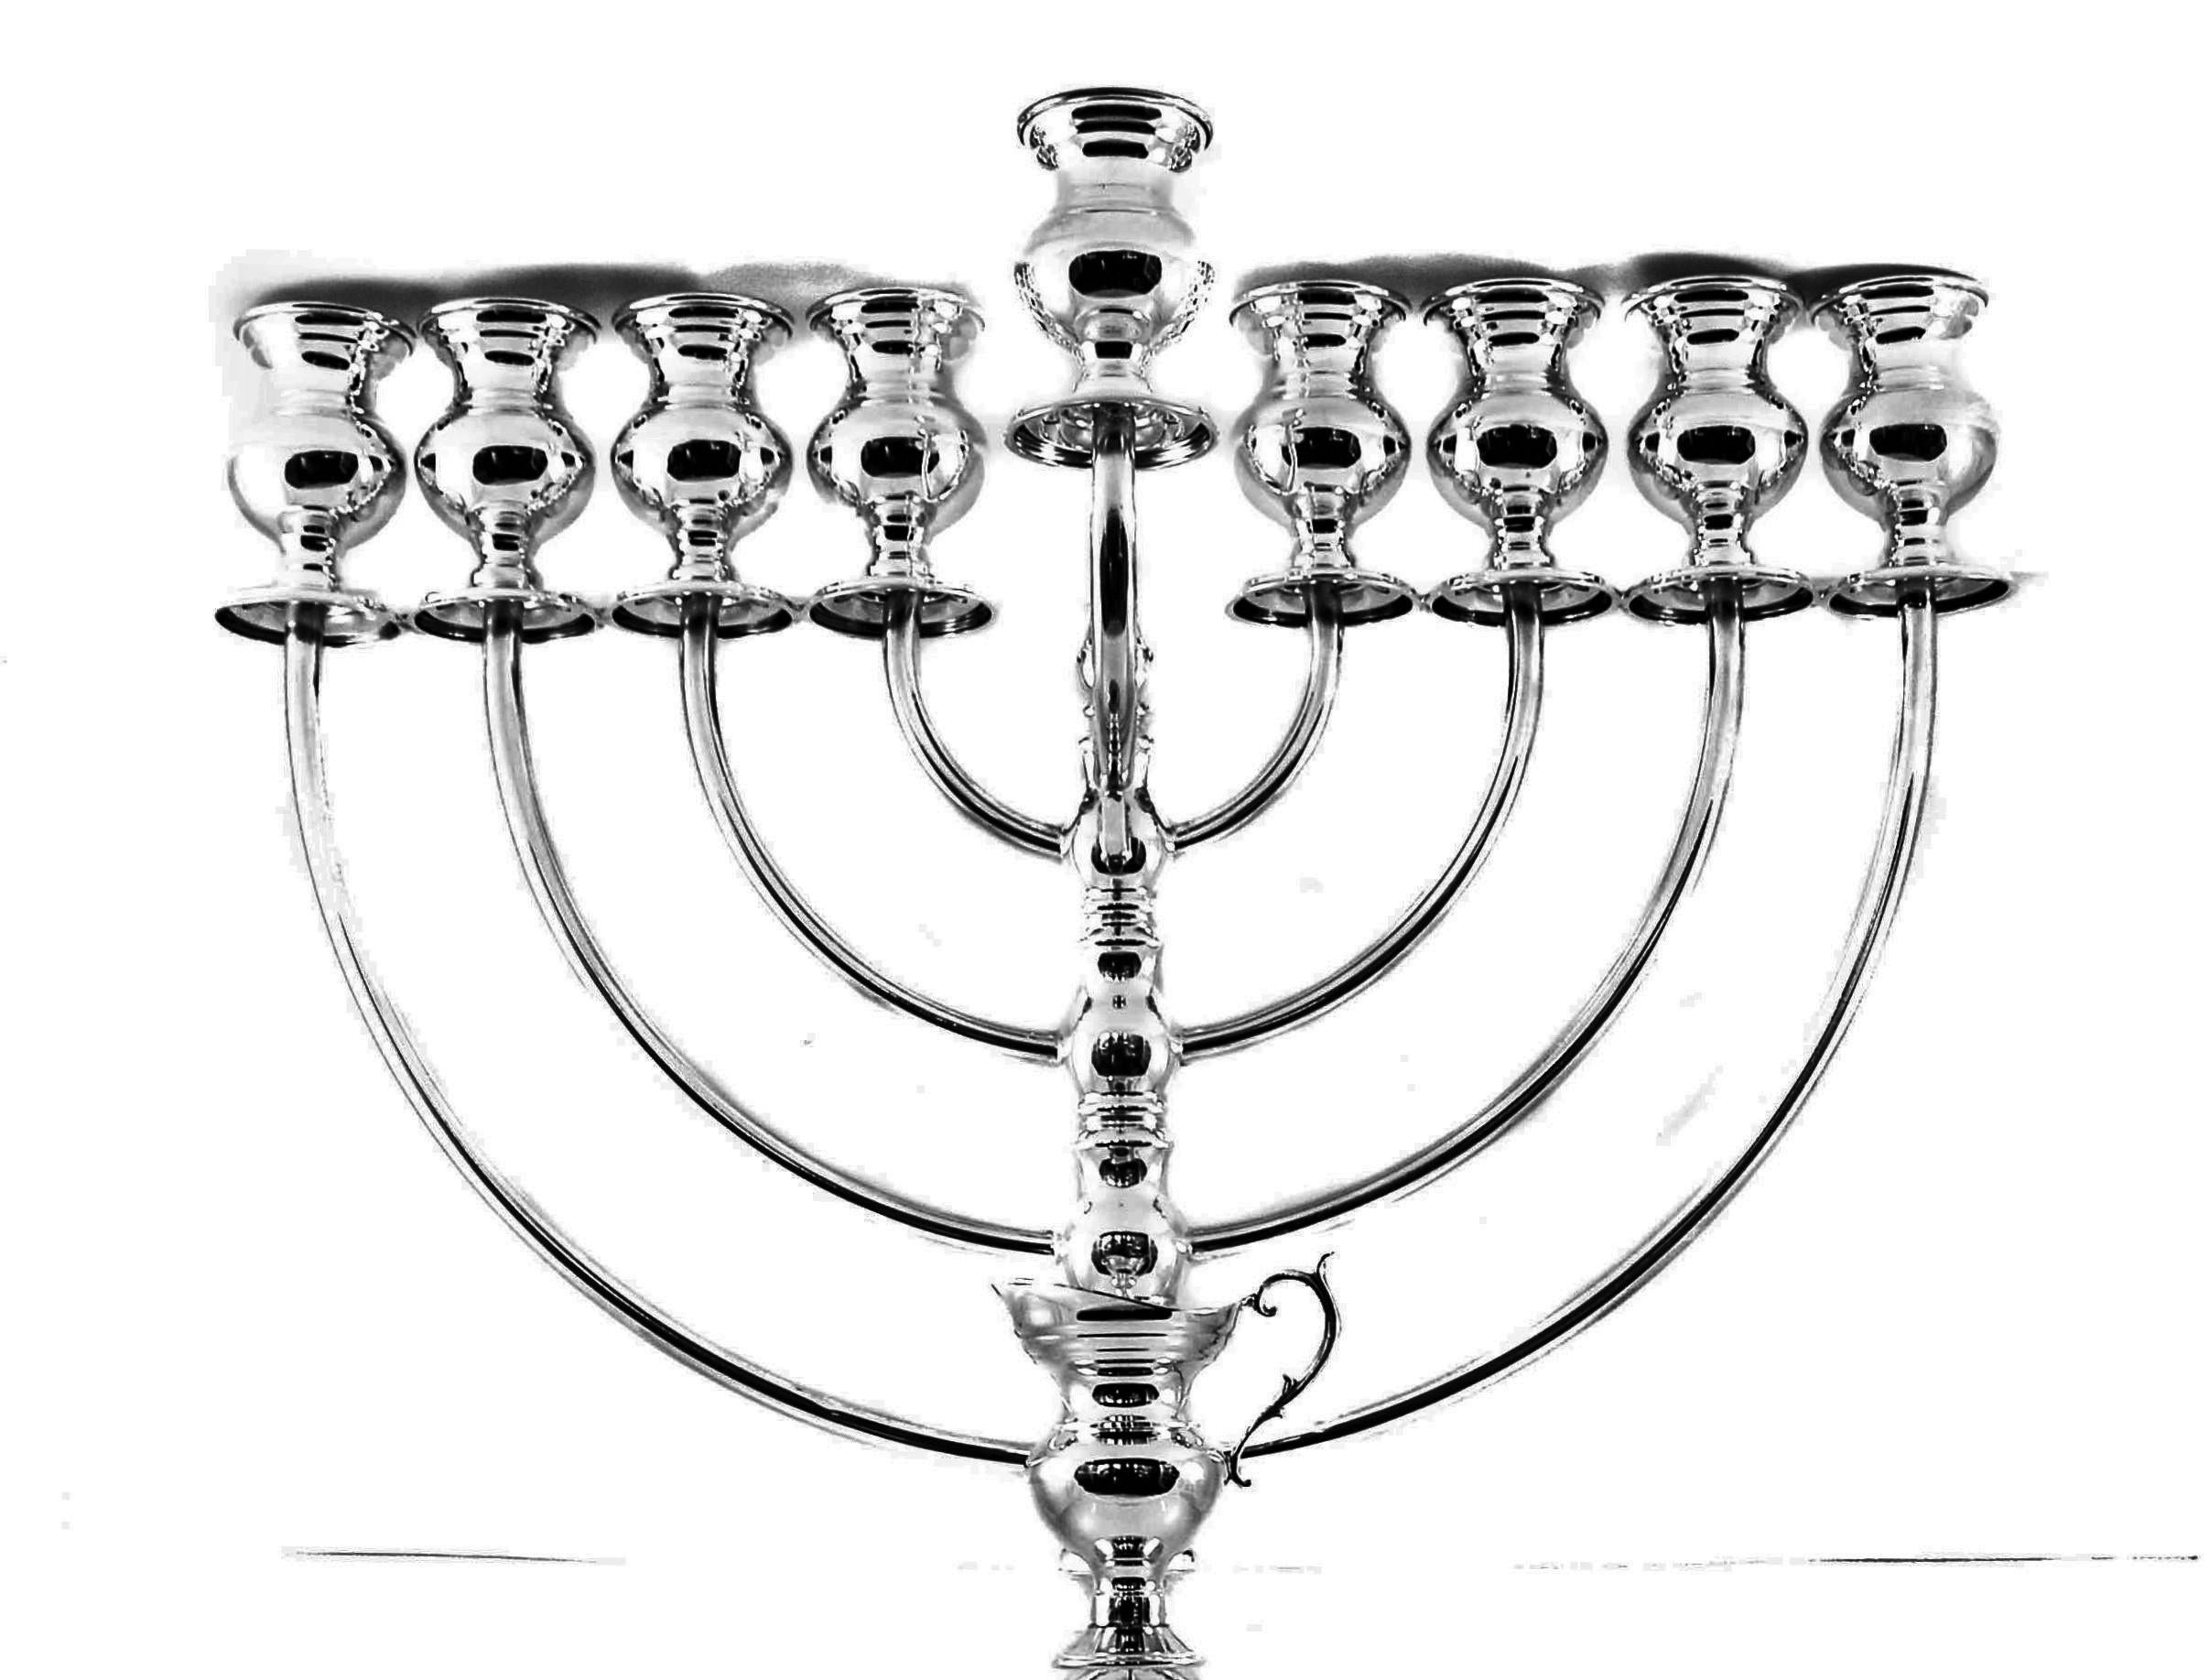 Standing tall and proud, this sterling silver menorah is so elegant. Sleek and modern in design it captures the pride and festivities of the Hanukkah. Either for your synagogue or home, this piece will shine brightly for eight days. After the